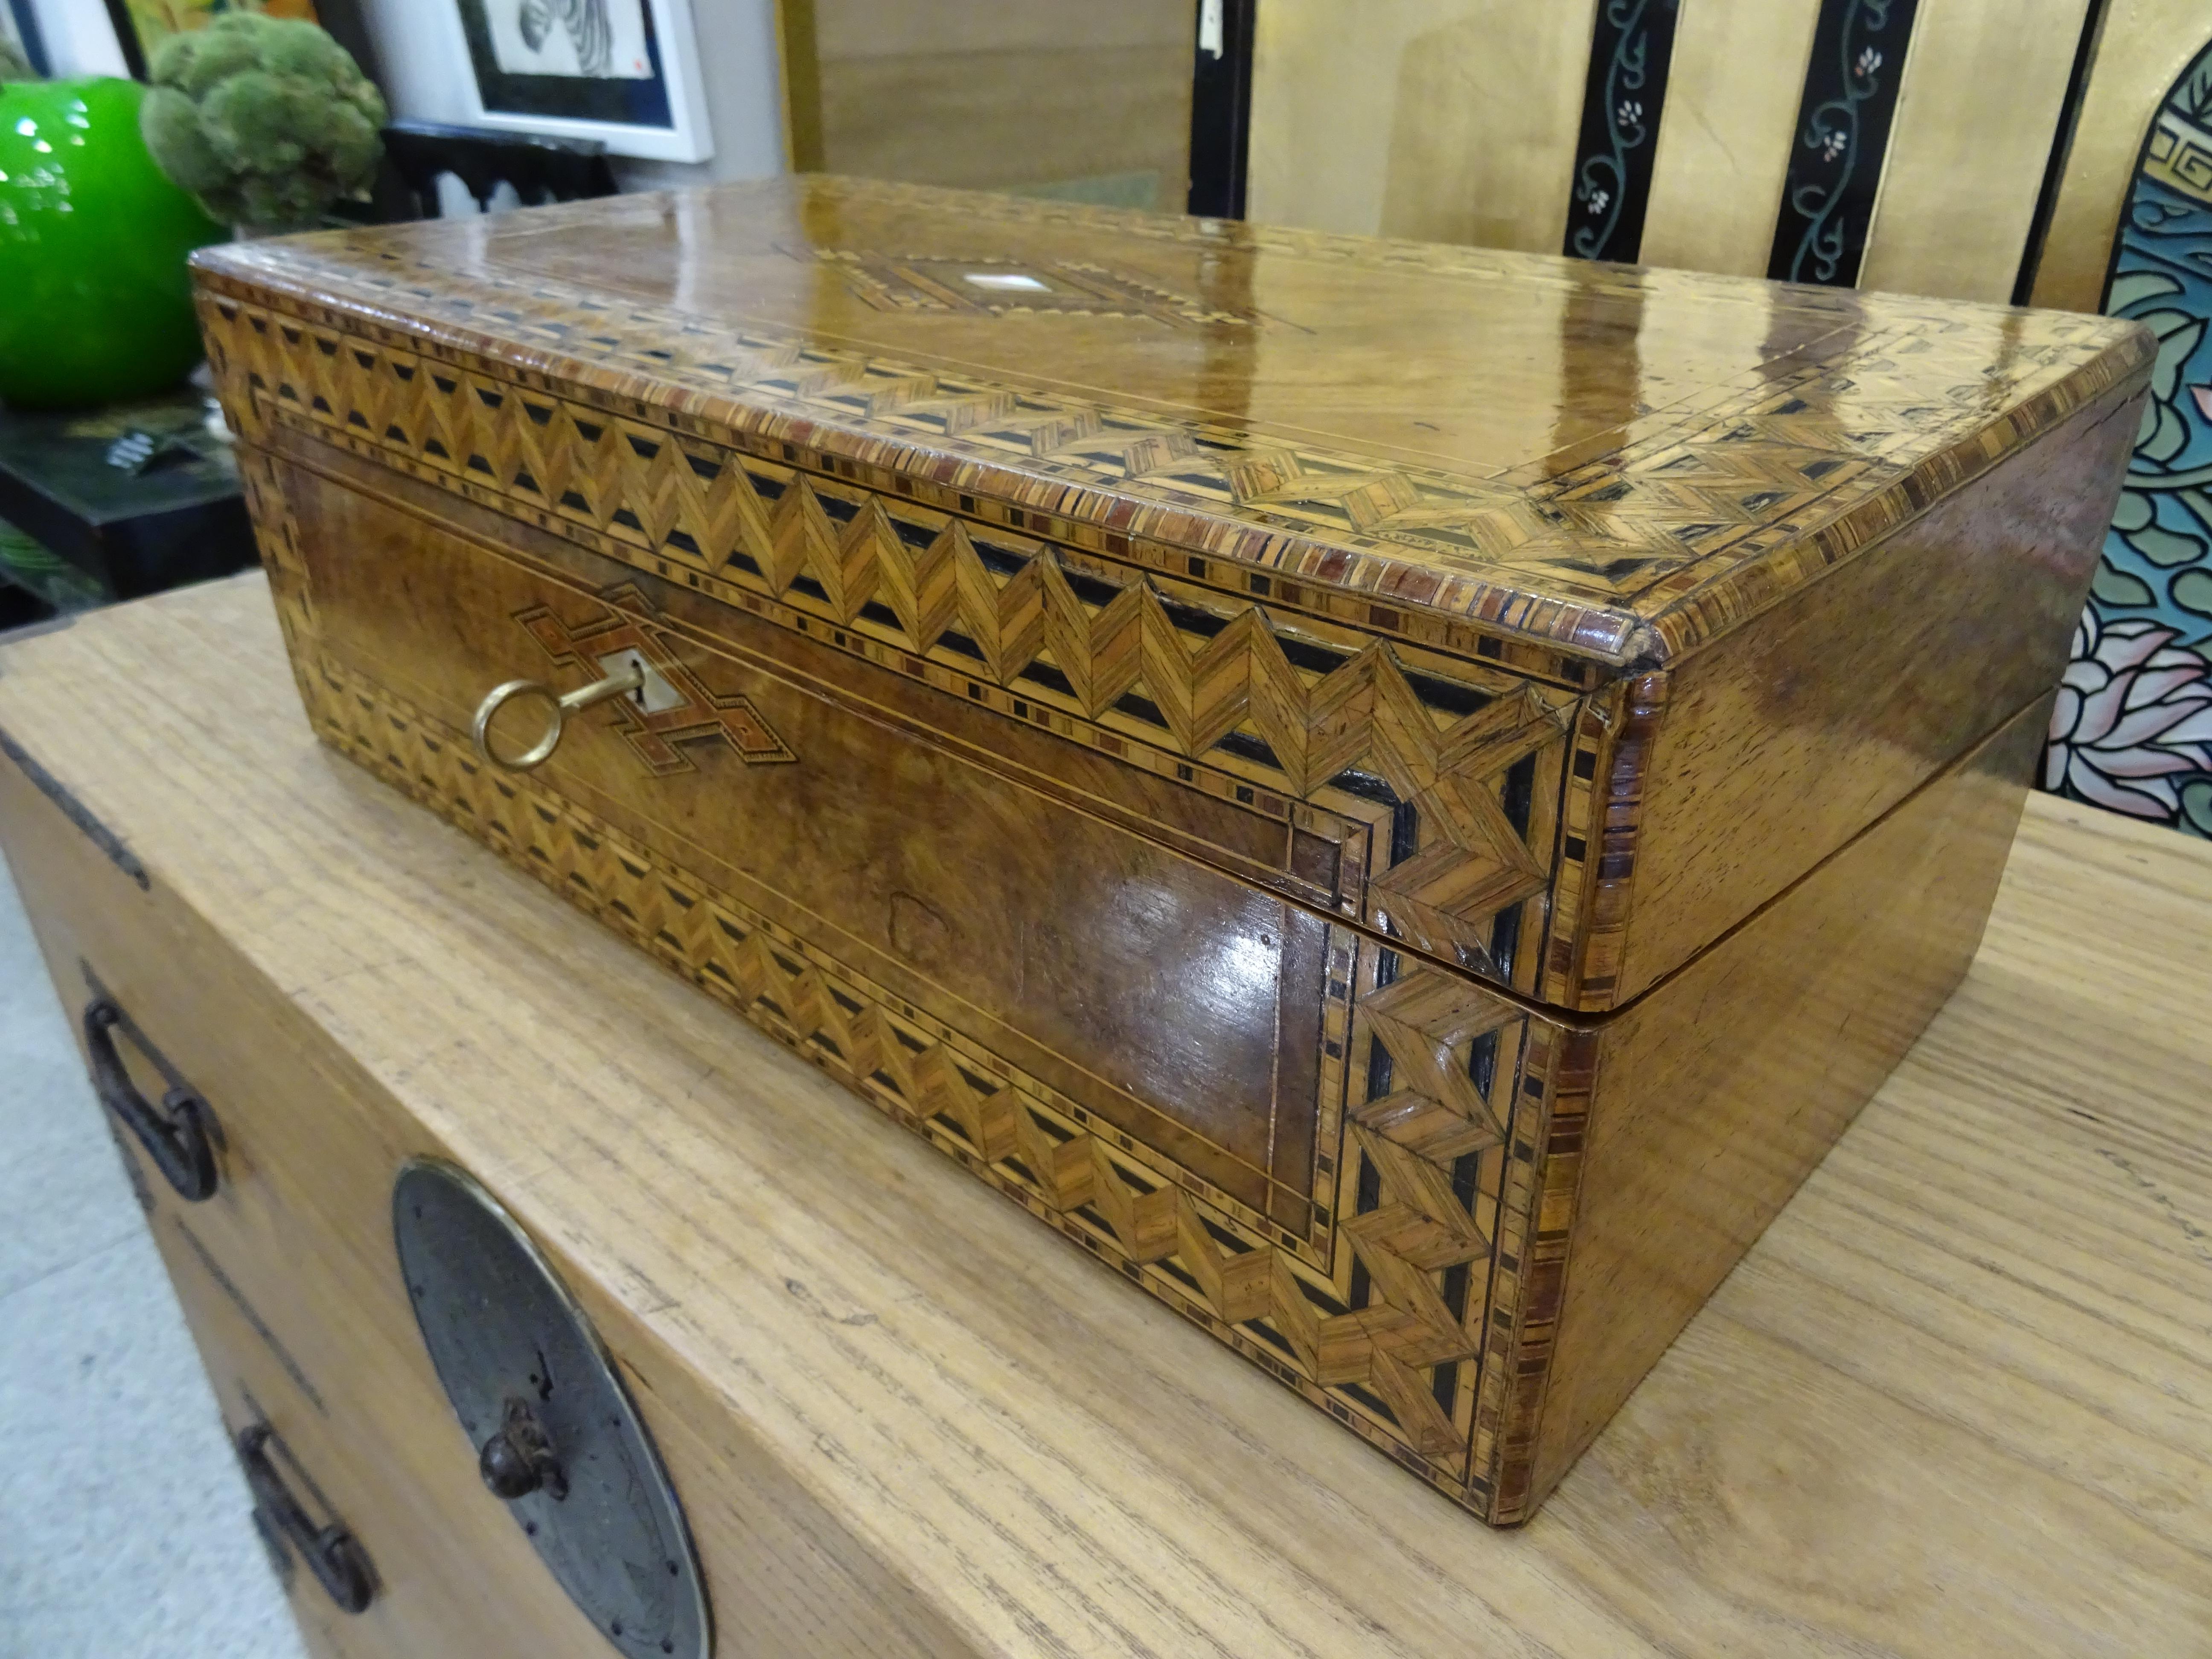 Amazing and refined English boat desk- box, inlaid wood with a geometric design and mother of pearl inlaid.
It opens and has different spaces for different desktop objects as well as the writing board. It has a key and it’s in a very good